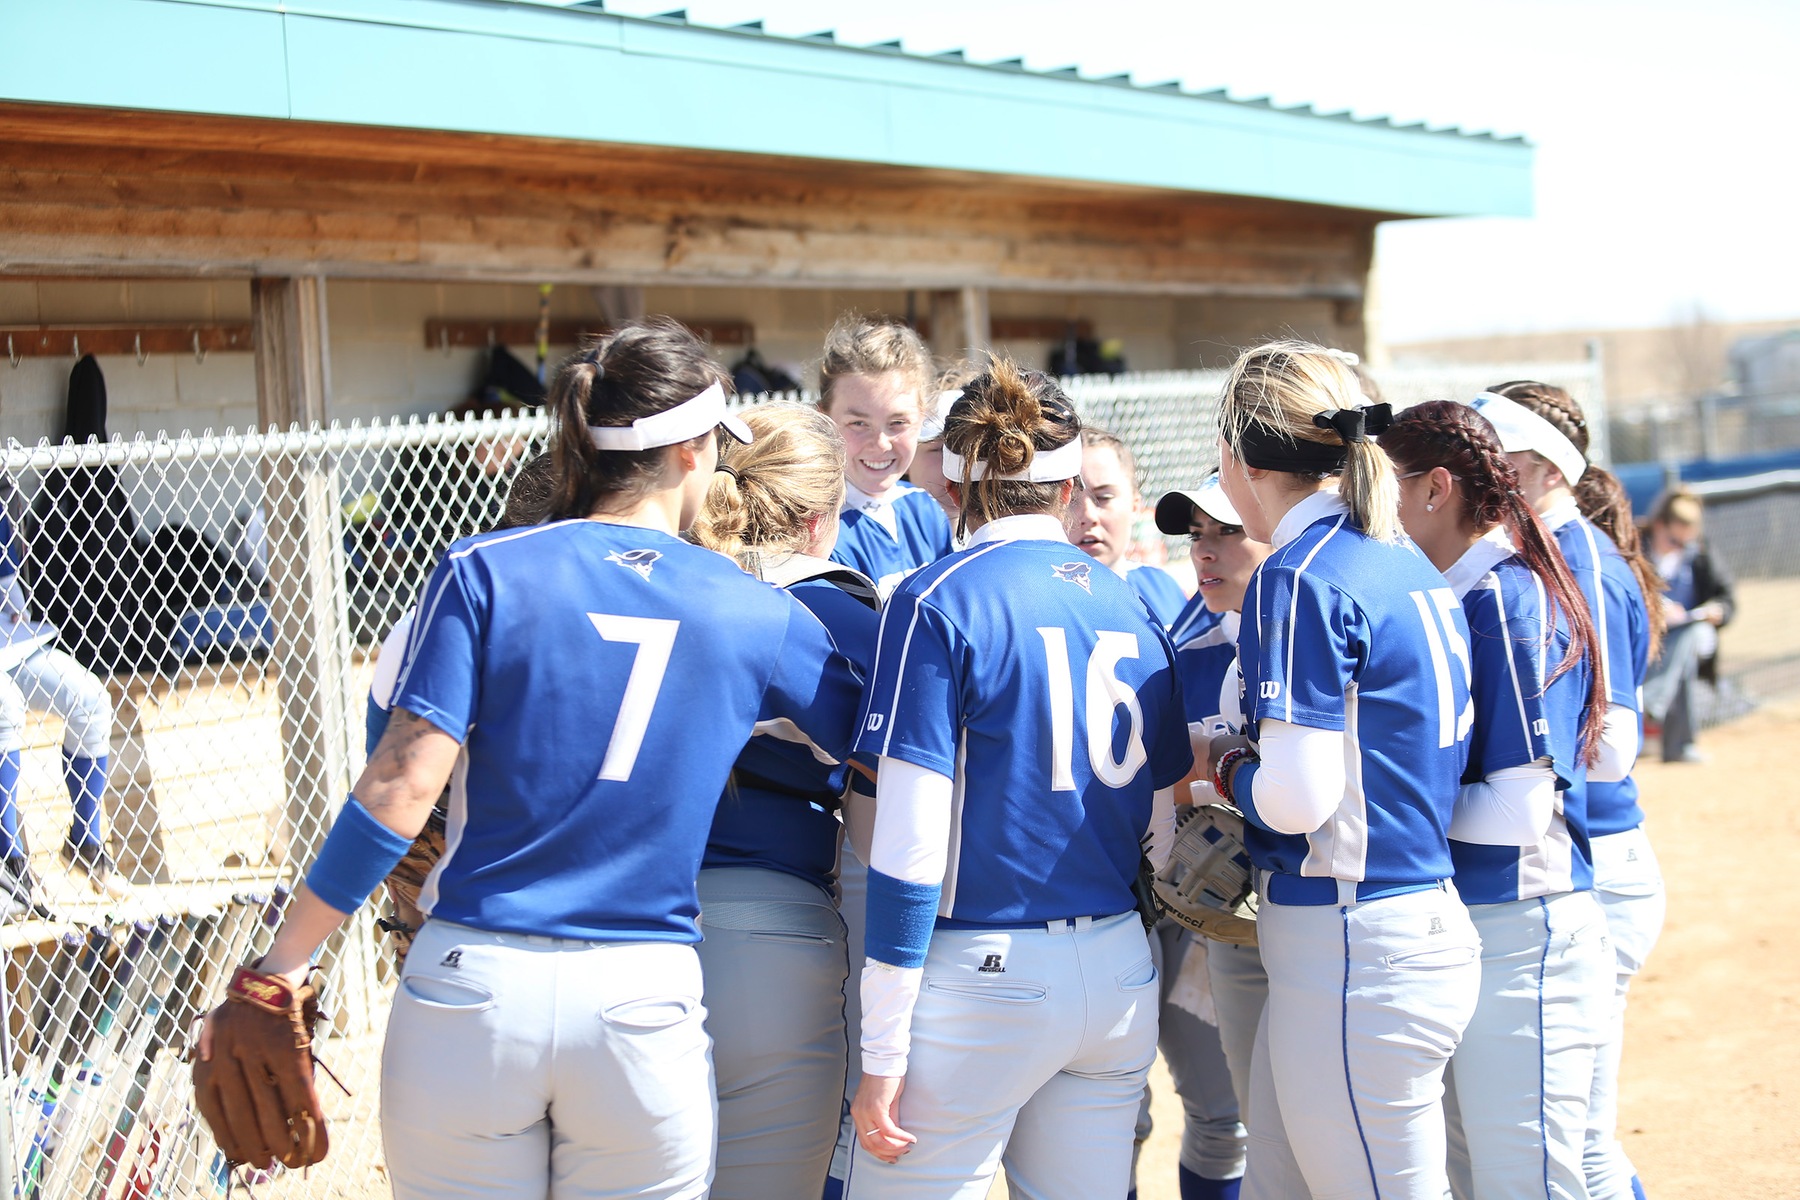 Softball makes schedule changes for the week